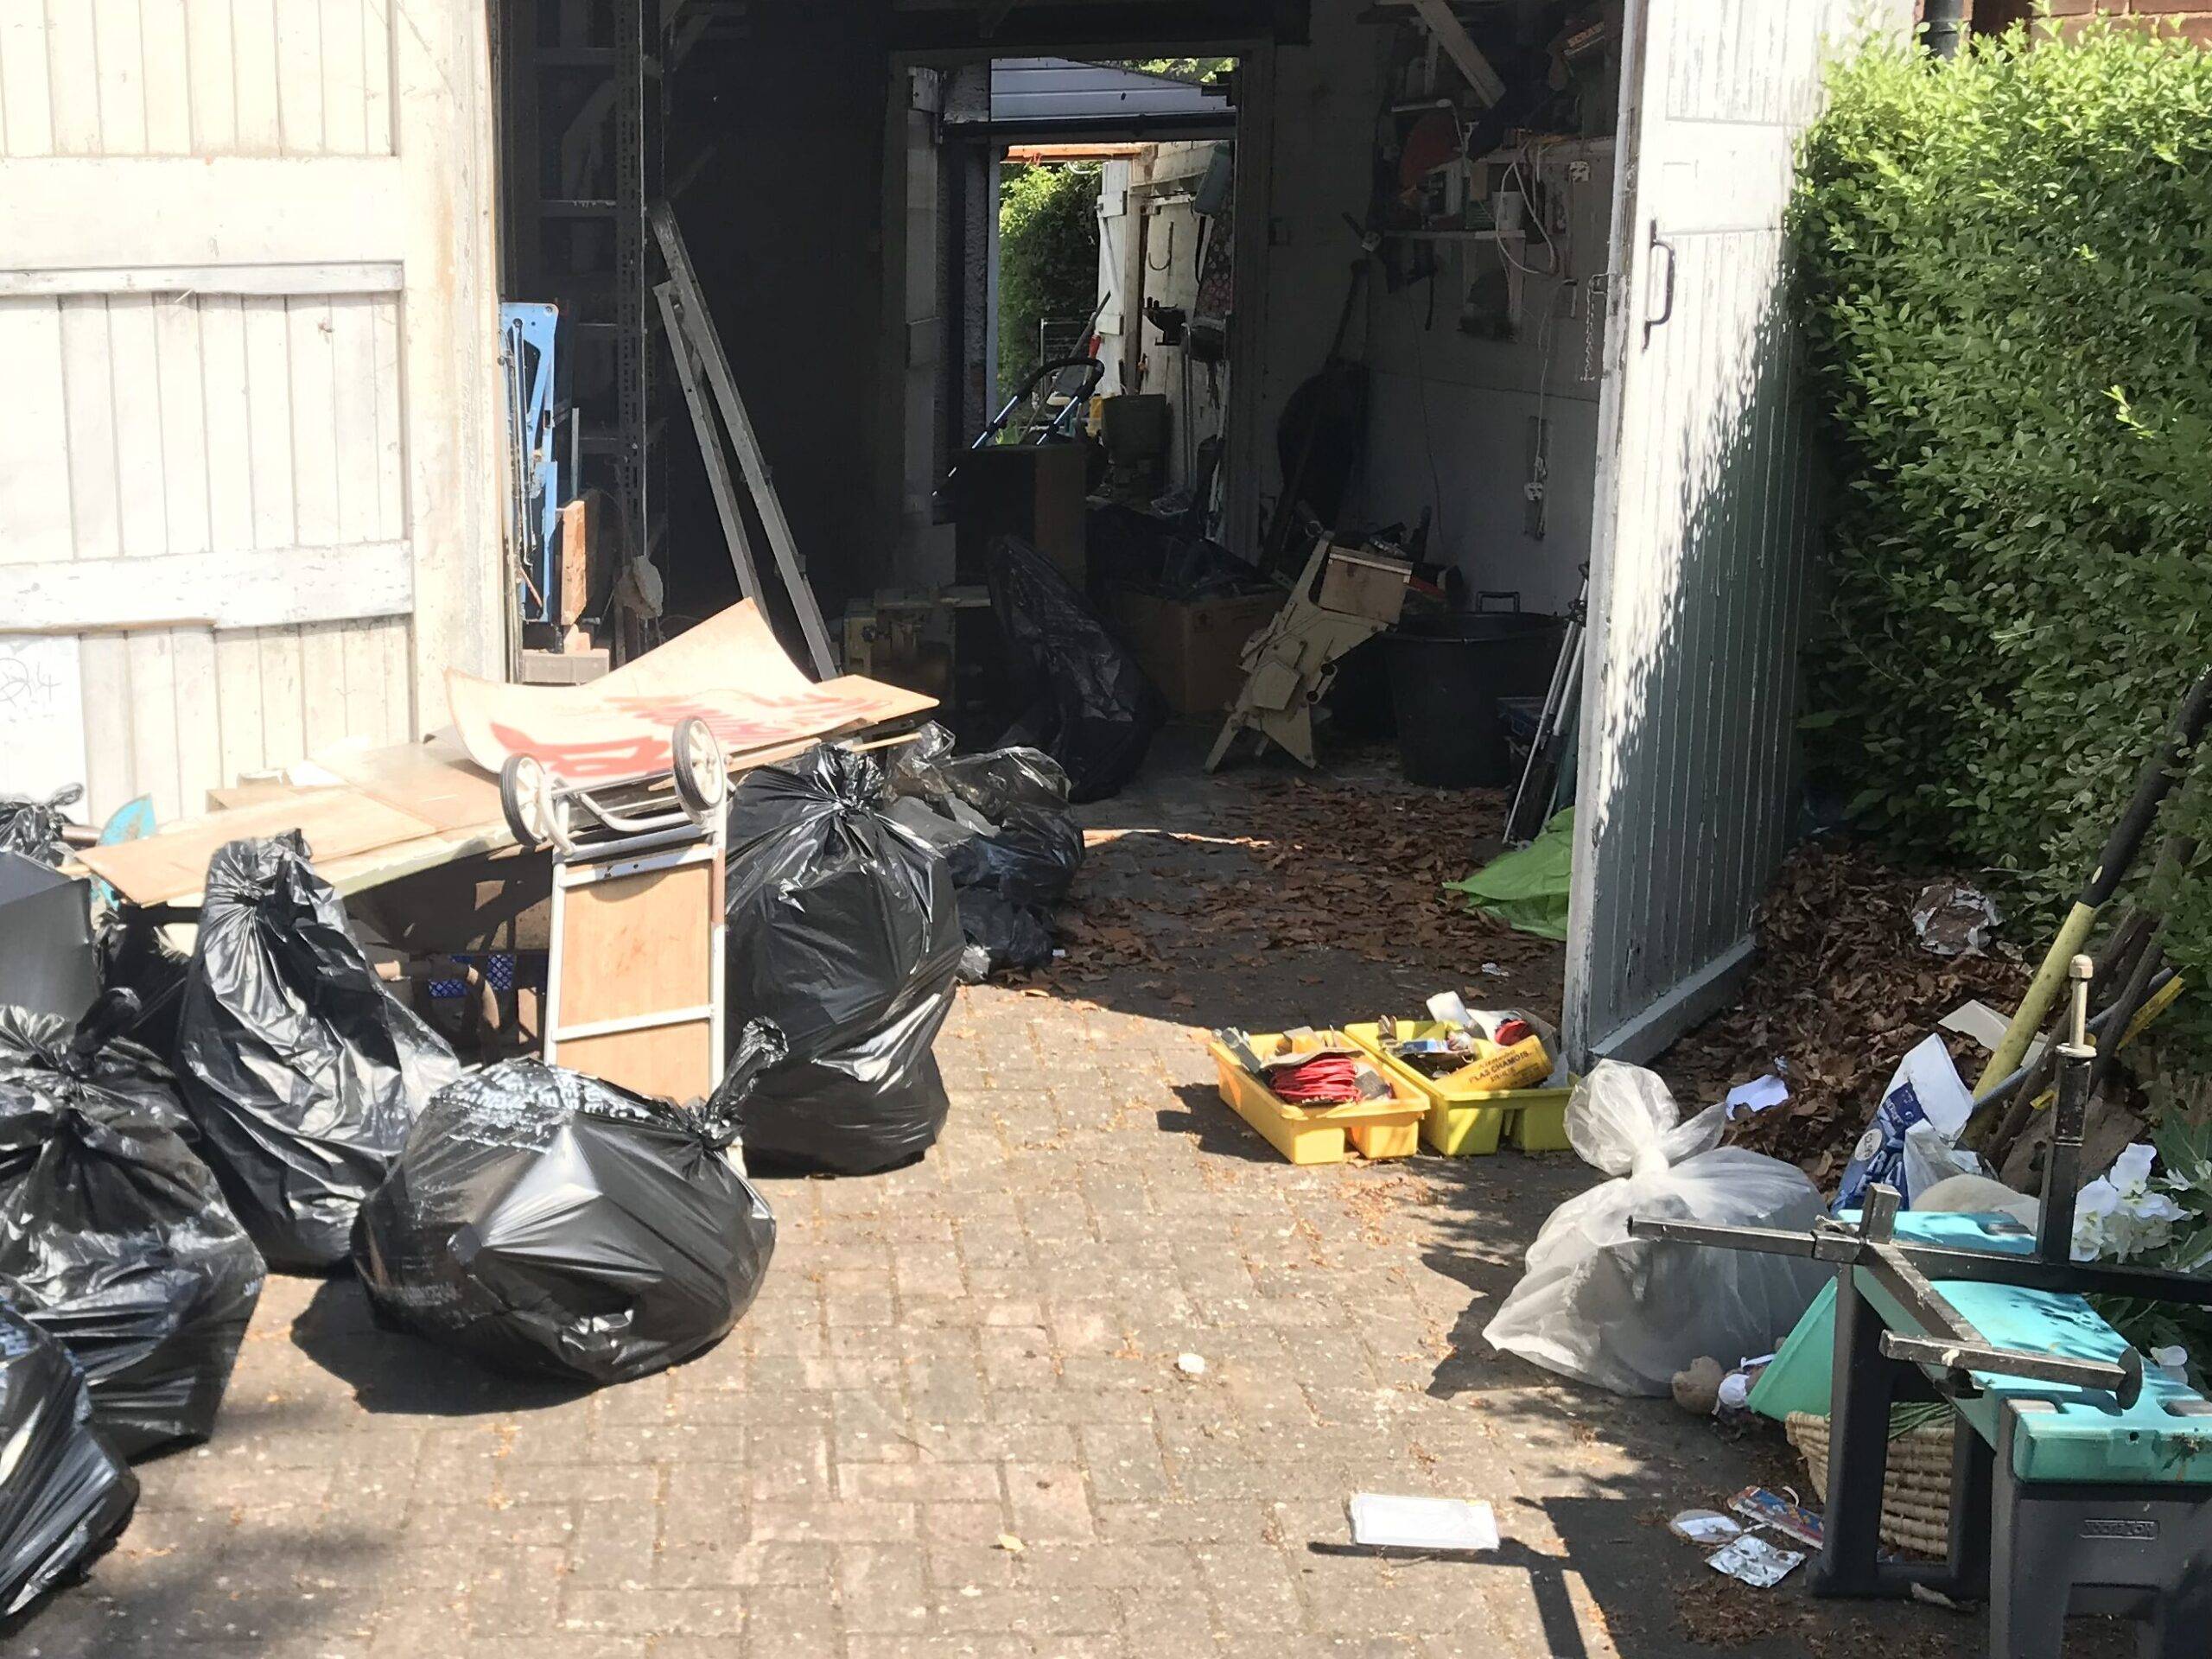 Berkeley House Clearance in Mere Green, Sutton Coldfield. House clearance services in progress/ rubbish removal. Rubbish bagged and ready to load onto the van. General household items outside and in the garage areas ready to be cleared. Ready for removal, recycling and disposal. 